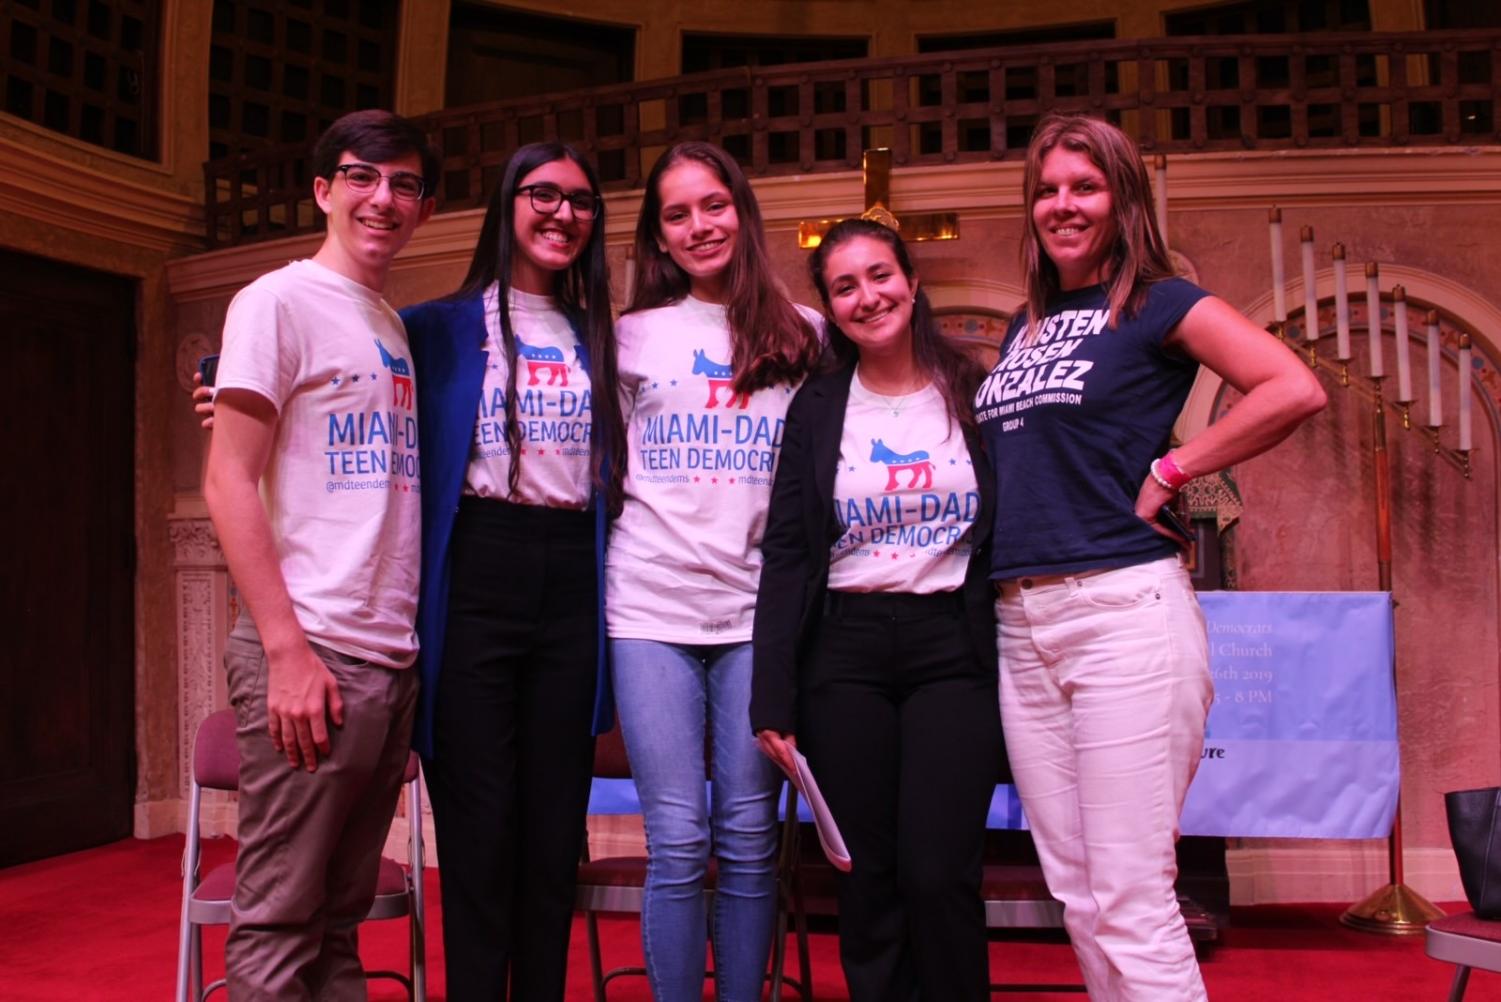 Miami-Dade+Youth+Town+Hall%3A+Teen+Voices+being+Heard